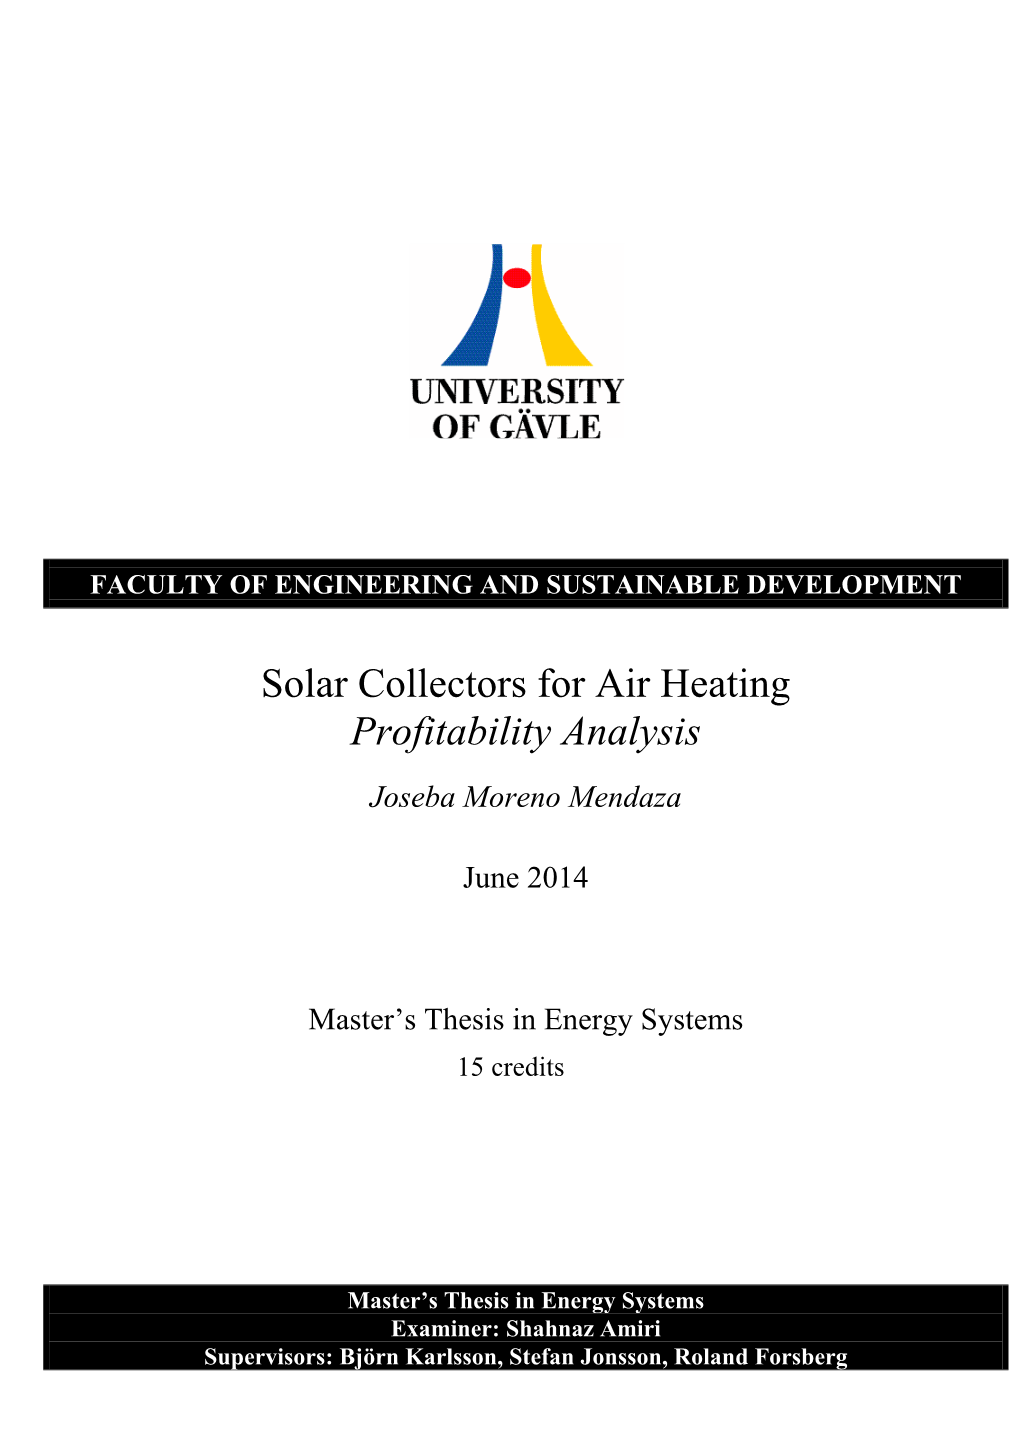 Solar Collectors for Air Heating Profitability Analysis